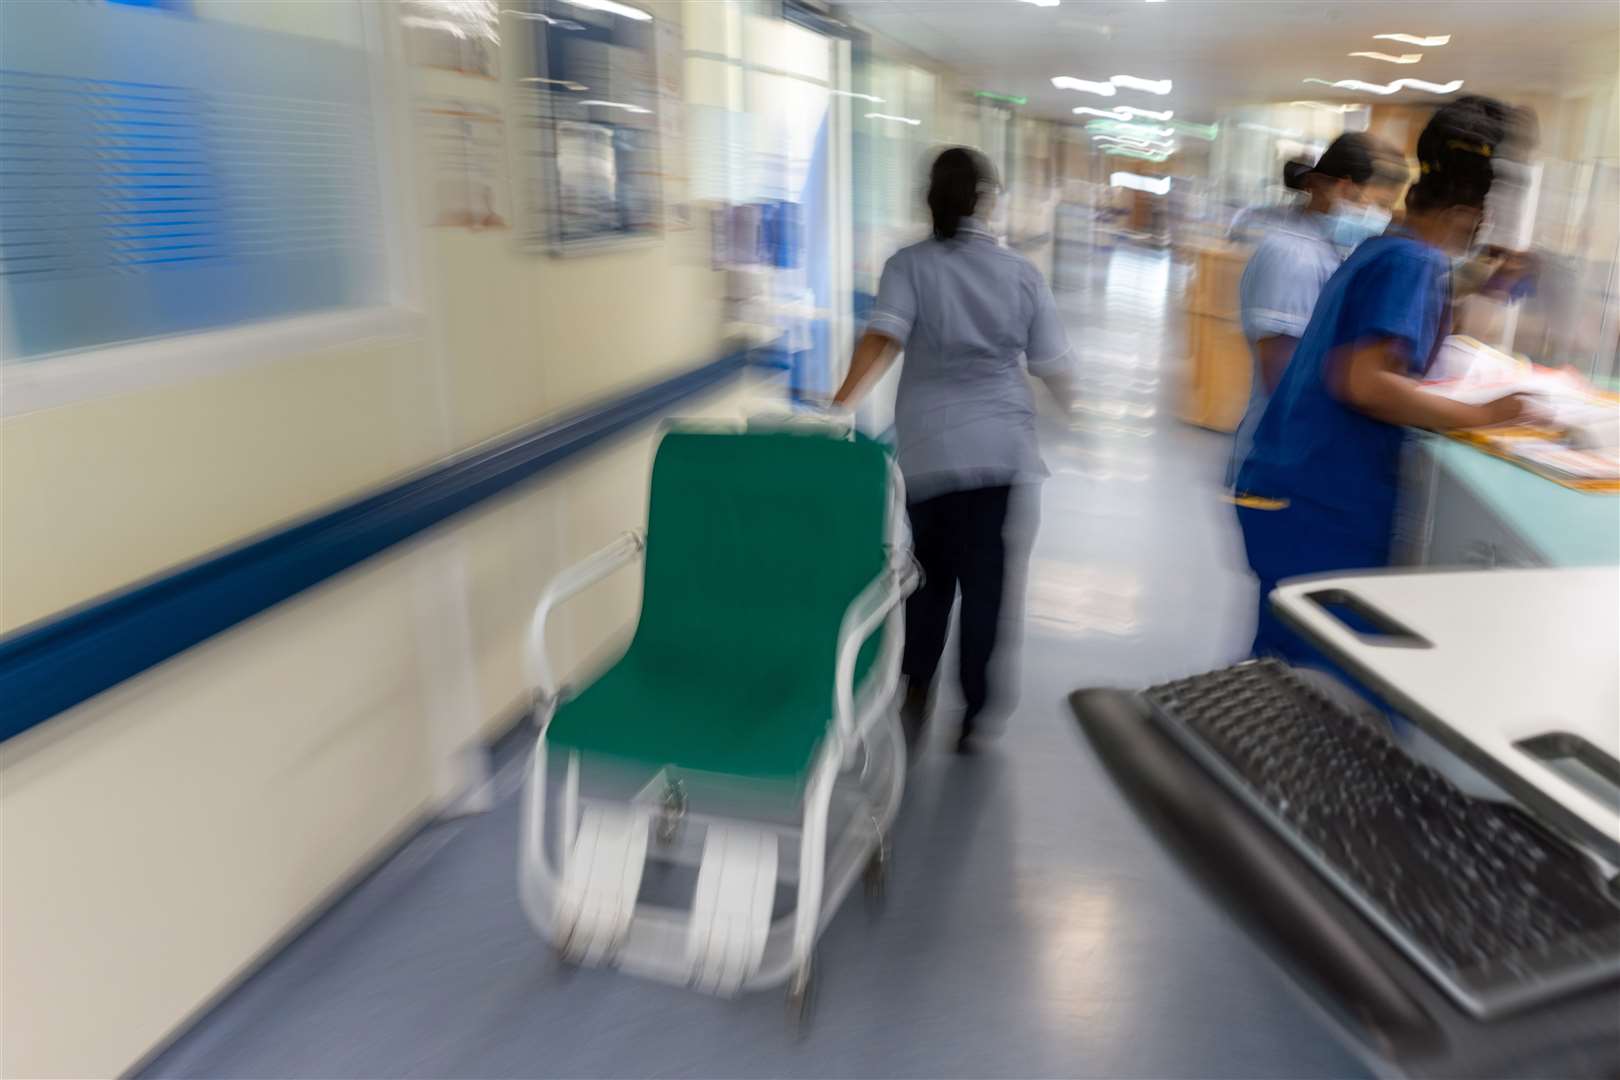 Hospital trusts were ‘wasting millions of pounds to destroy’ doctors, it was claimed (Jeff Moore/PA)